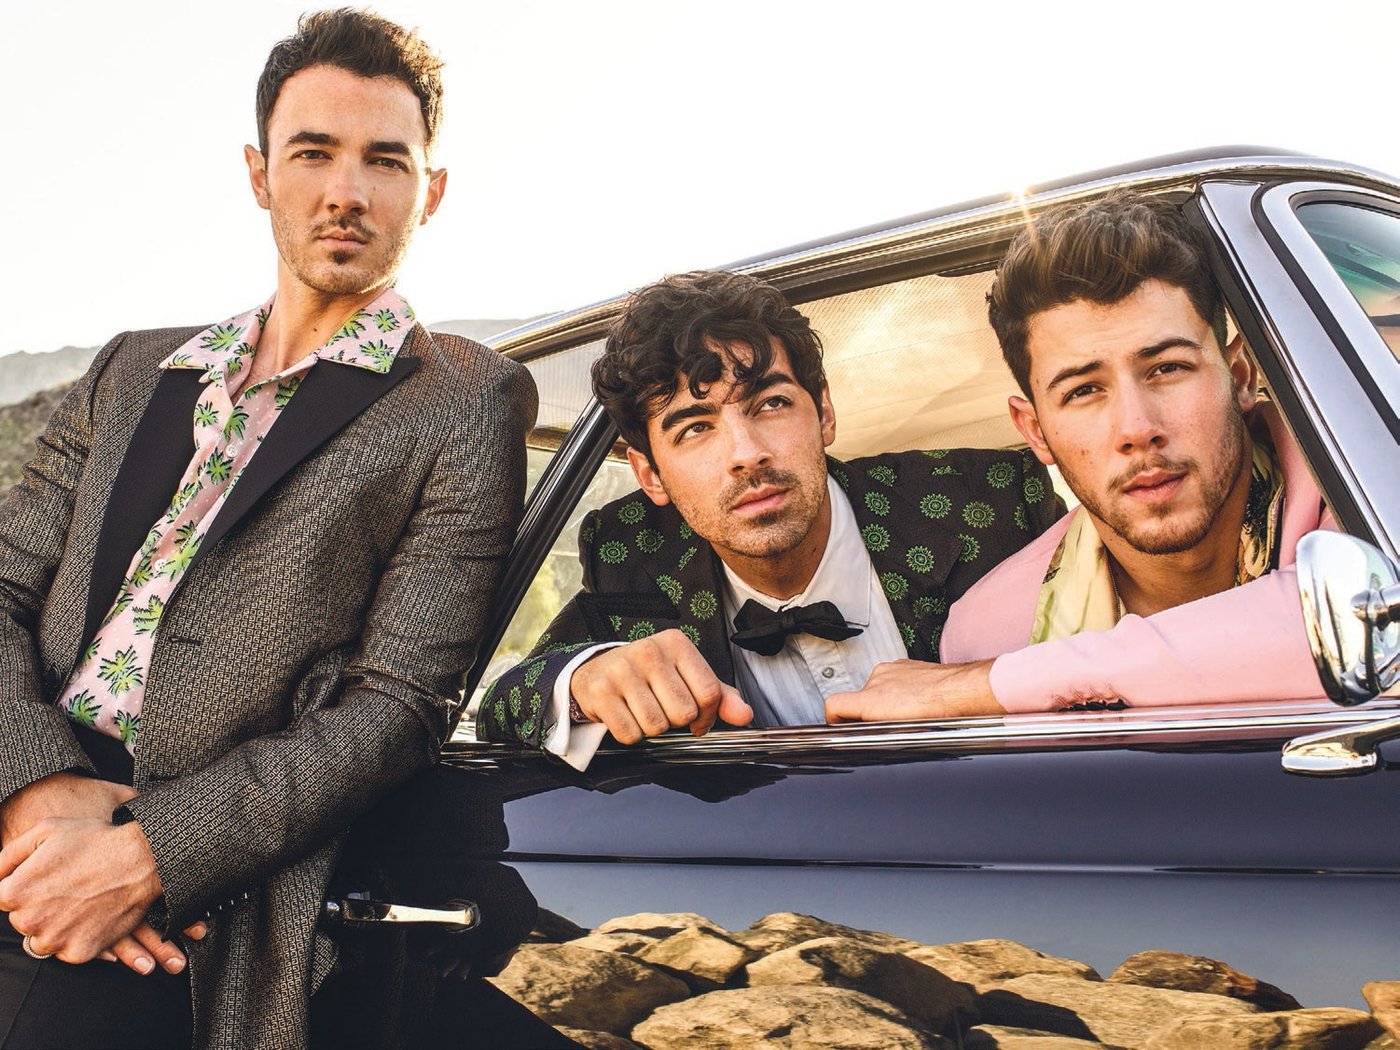 Kevin, Joe and Nick Jonas headline The Remember This Tour, stopping in Sunrise this month. JONAS BROTHERS PHOTO BY PEGGY SIROTA/COURTESY OF UNIVERSAL MUSIC